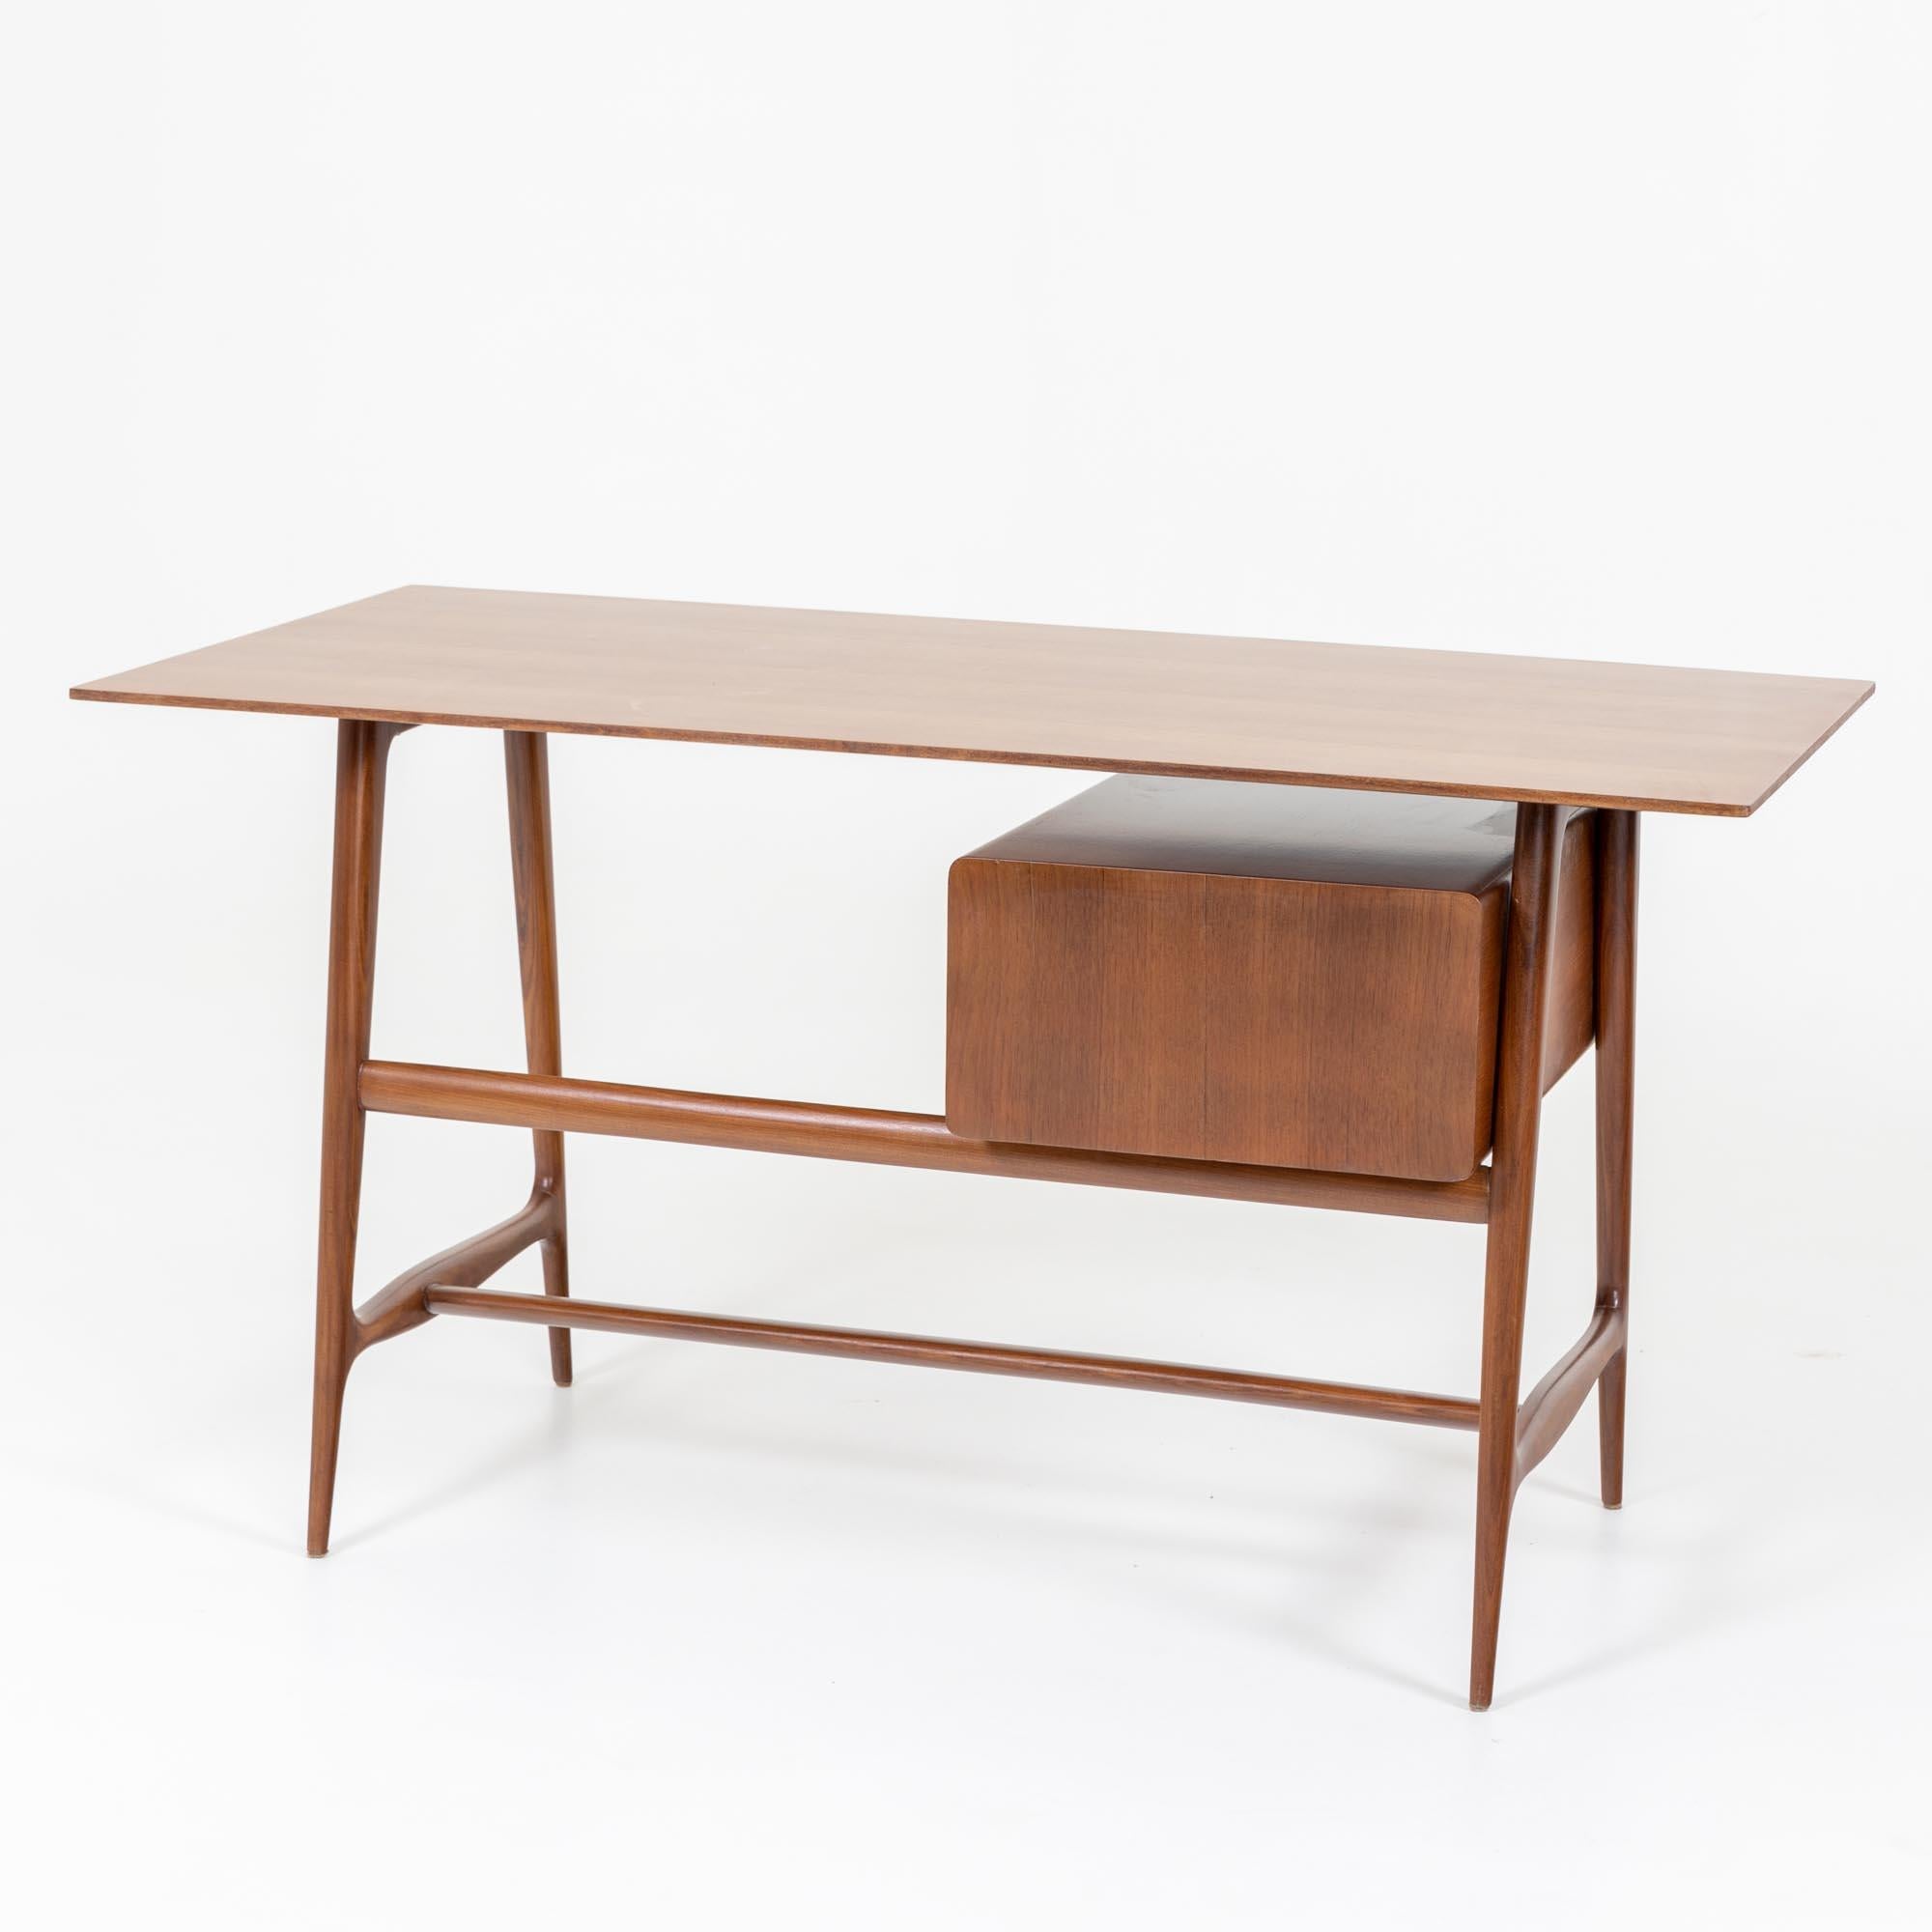 Veneer Small Writing Desk with two Drawers, Italian Manufactory, Mid-20th Century